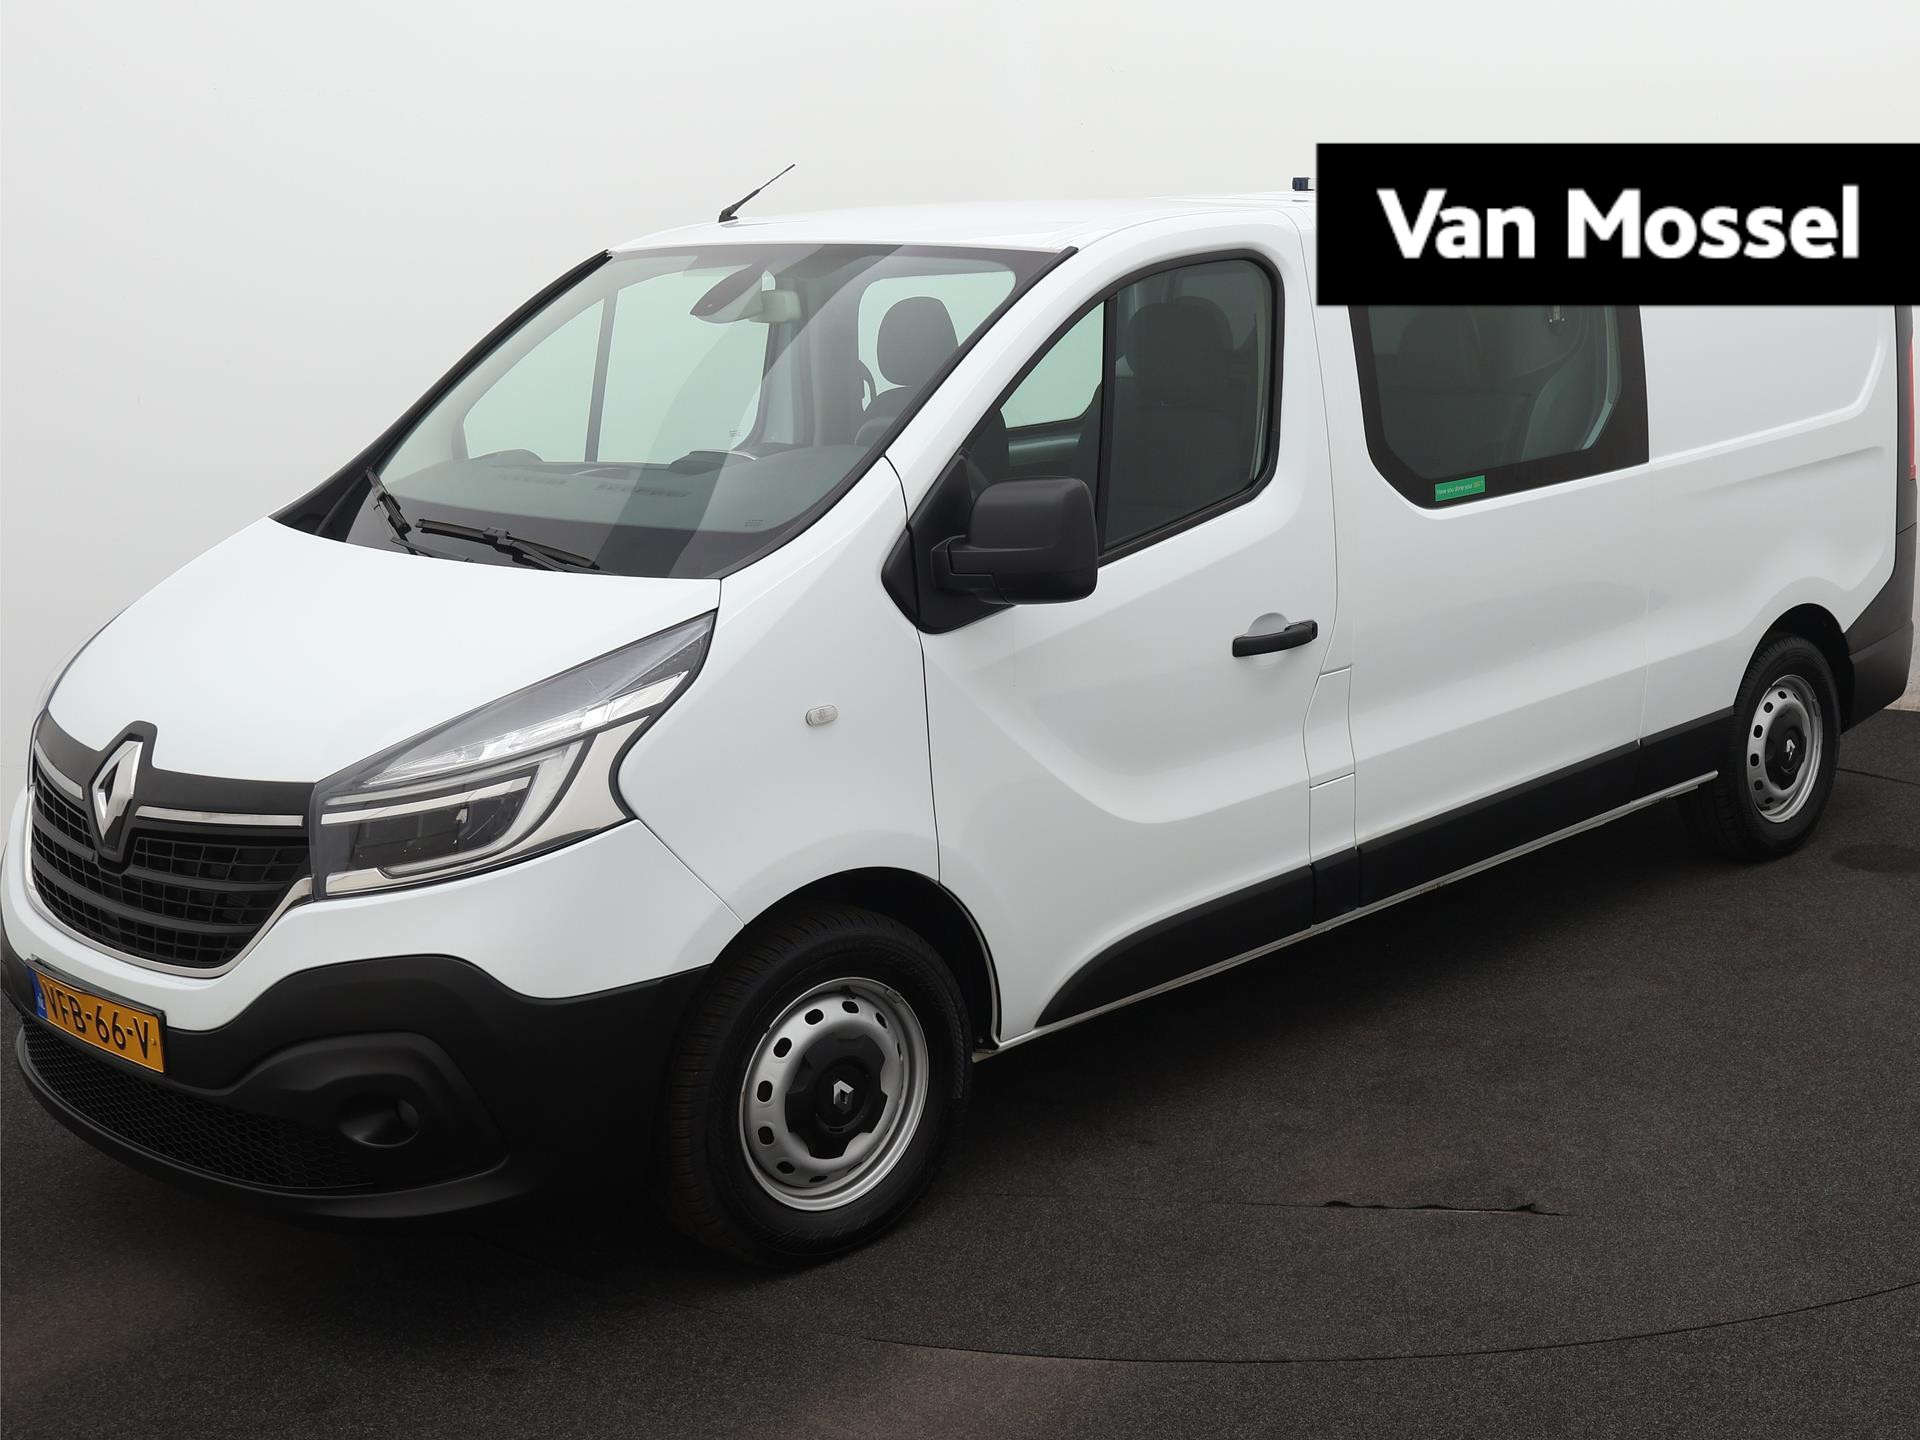 Renault Trafic 2.0 dCi 145 T29 L2H1 DC Comfort | Automaat | Navigatie | Dubbele Cabine | Airco | Cruise Control | Start & Stop Systeem |